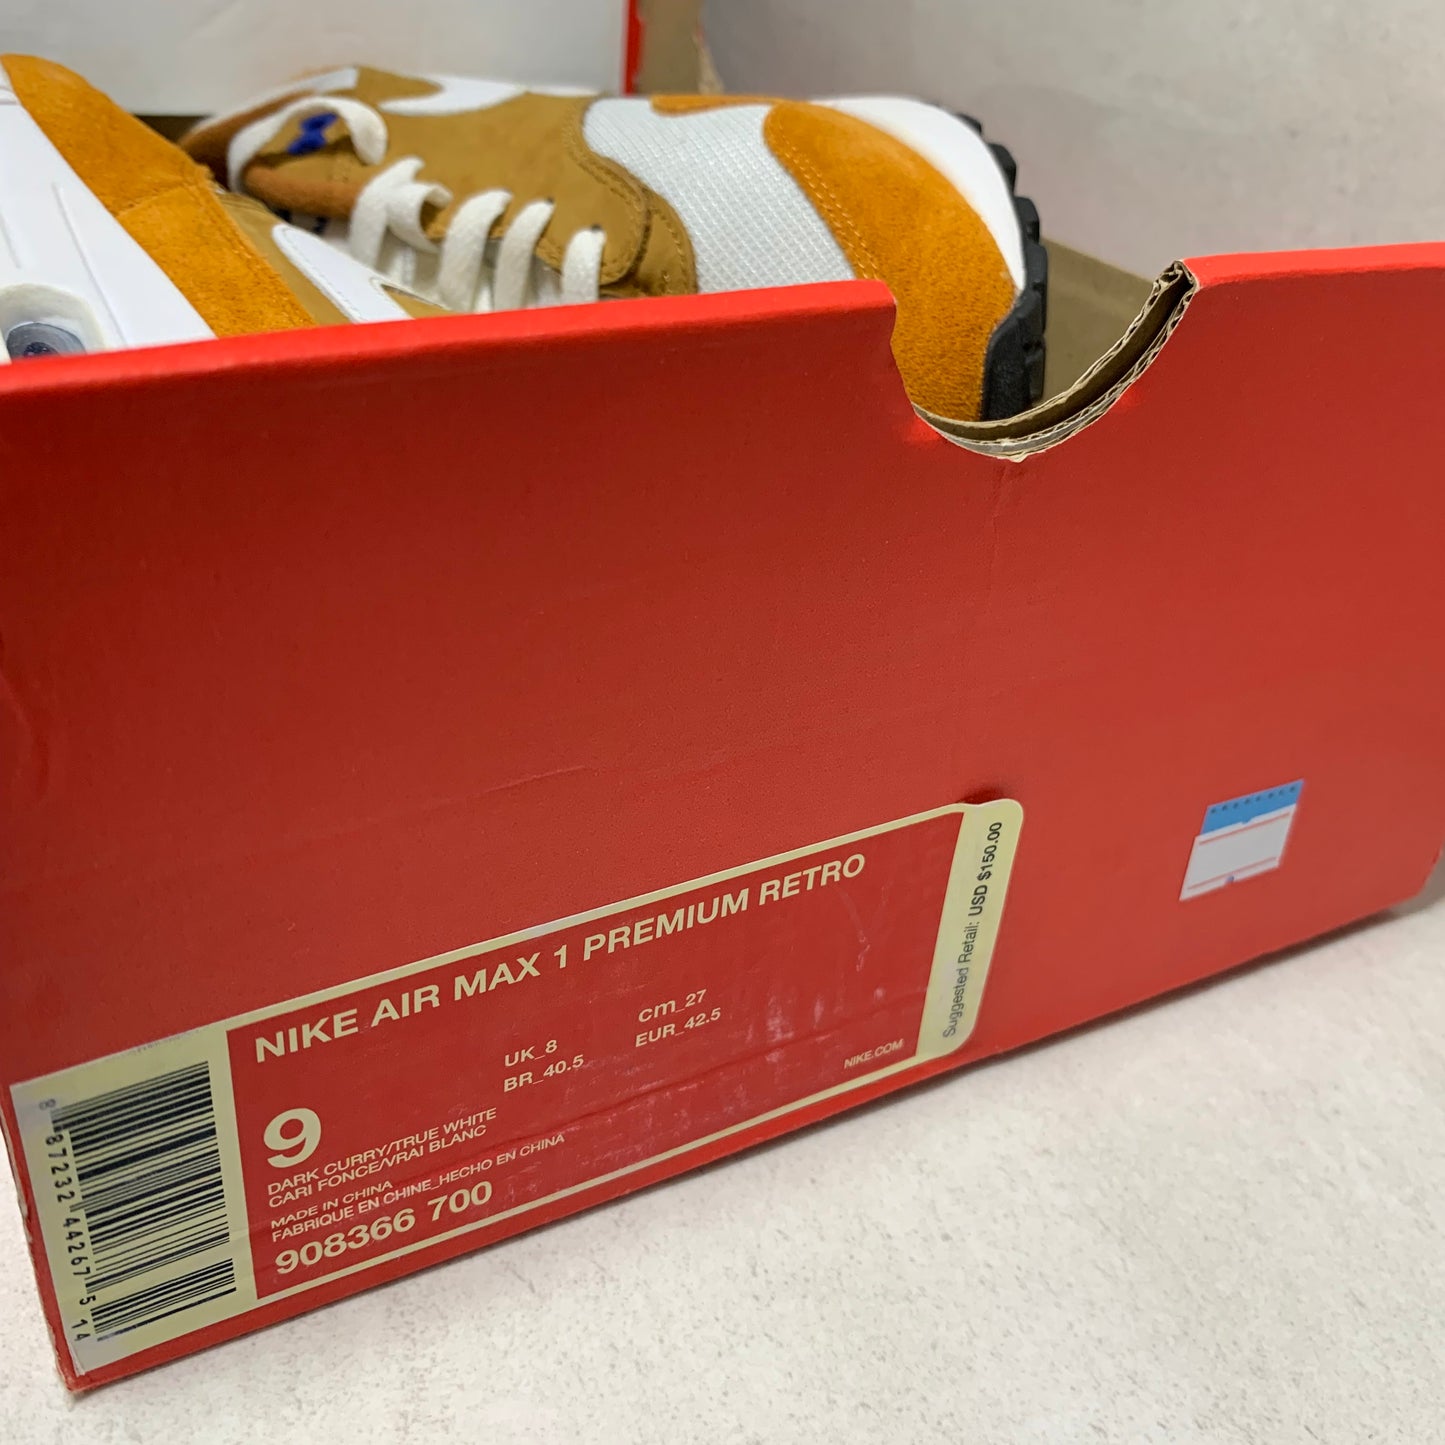 Nike Air Max 1 Size 9 Curry (2018) 908366-700